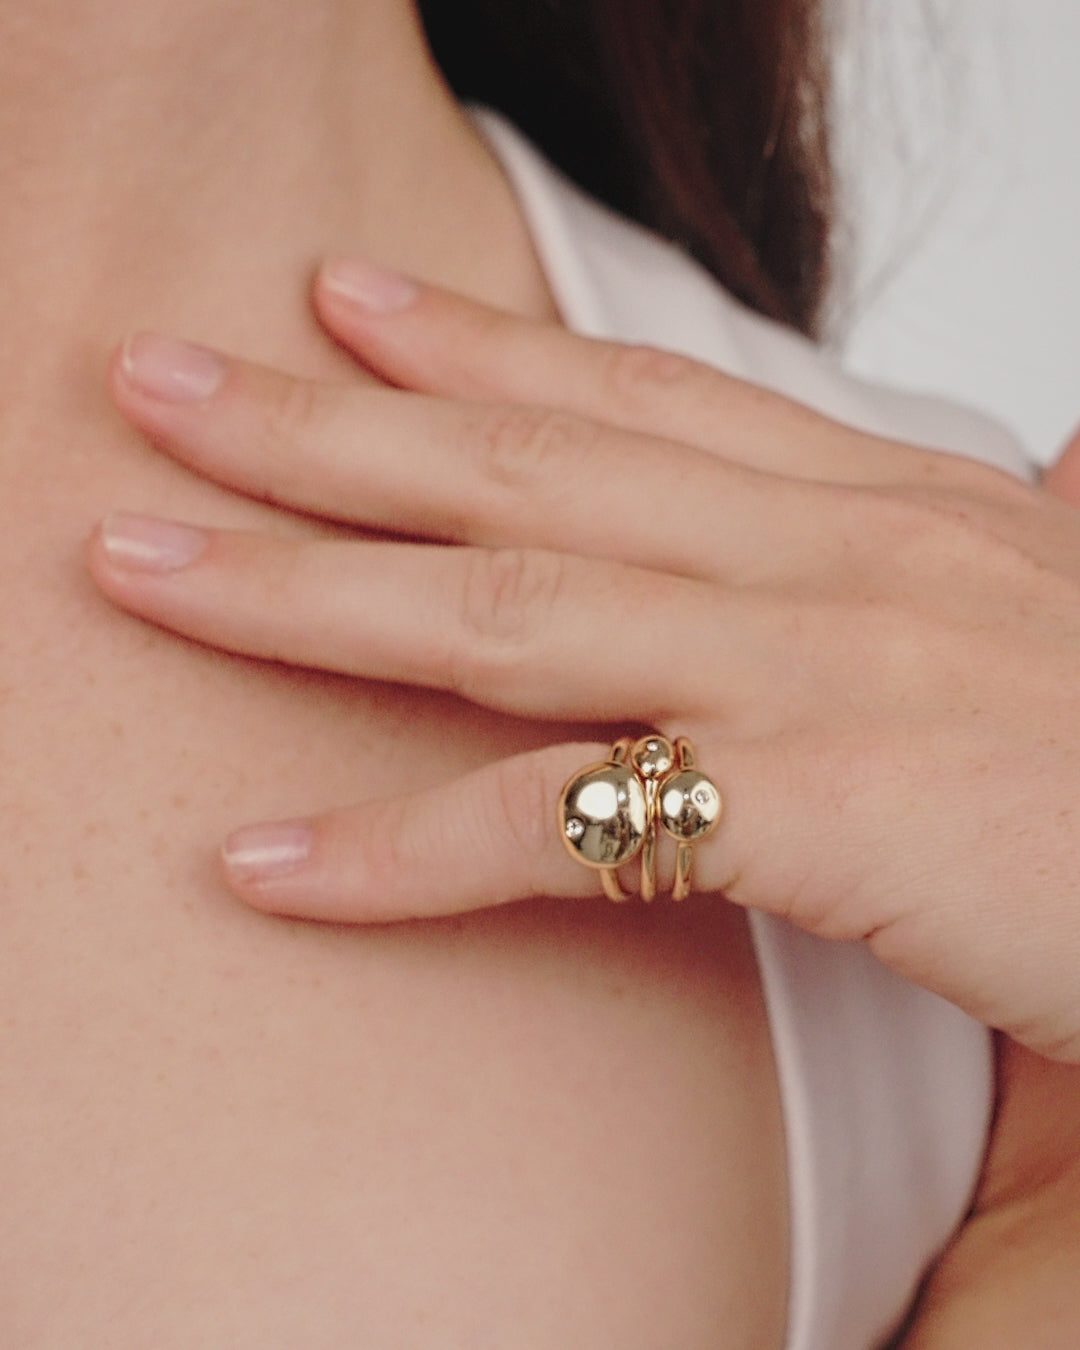 Polished Stacking Pebble Ring Set in gold in video